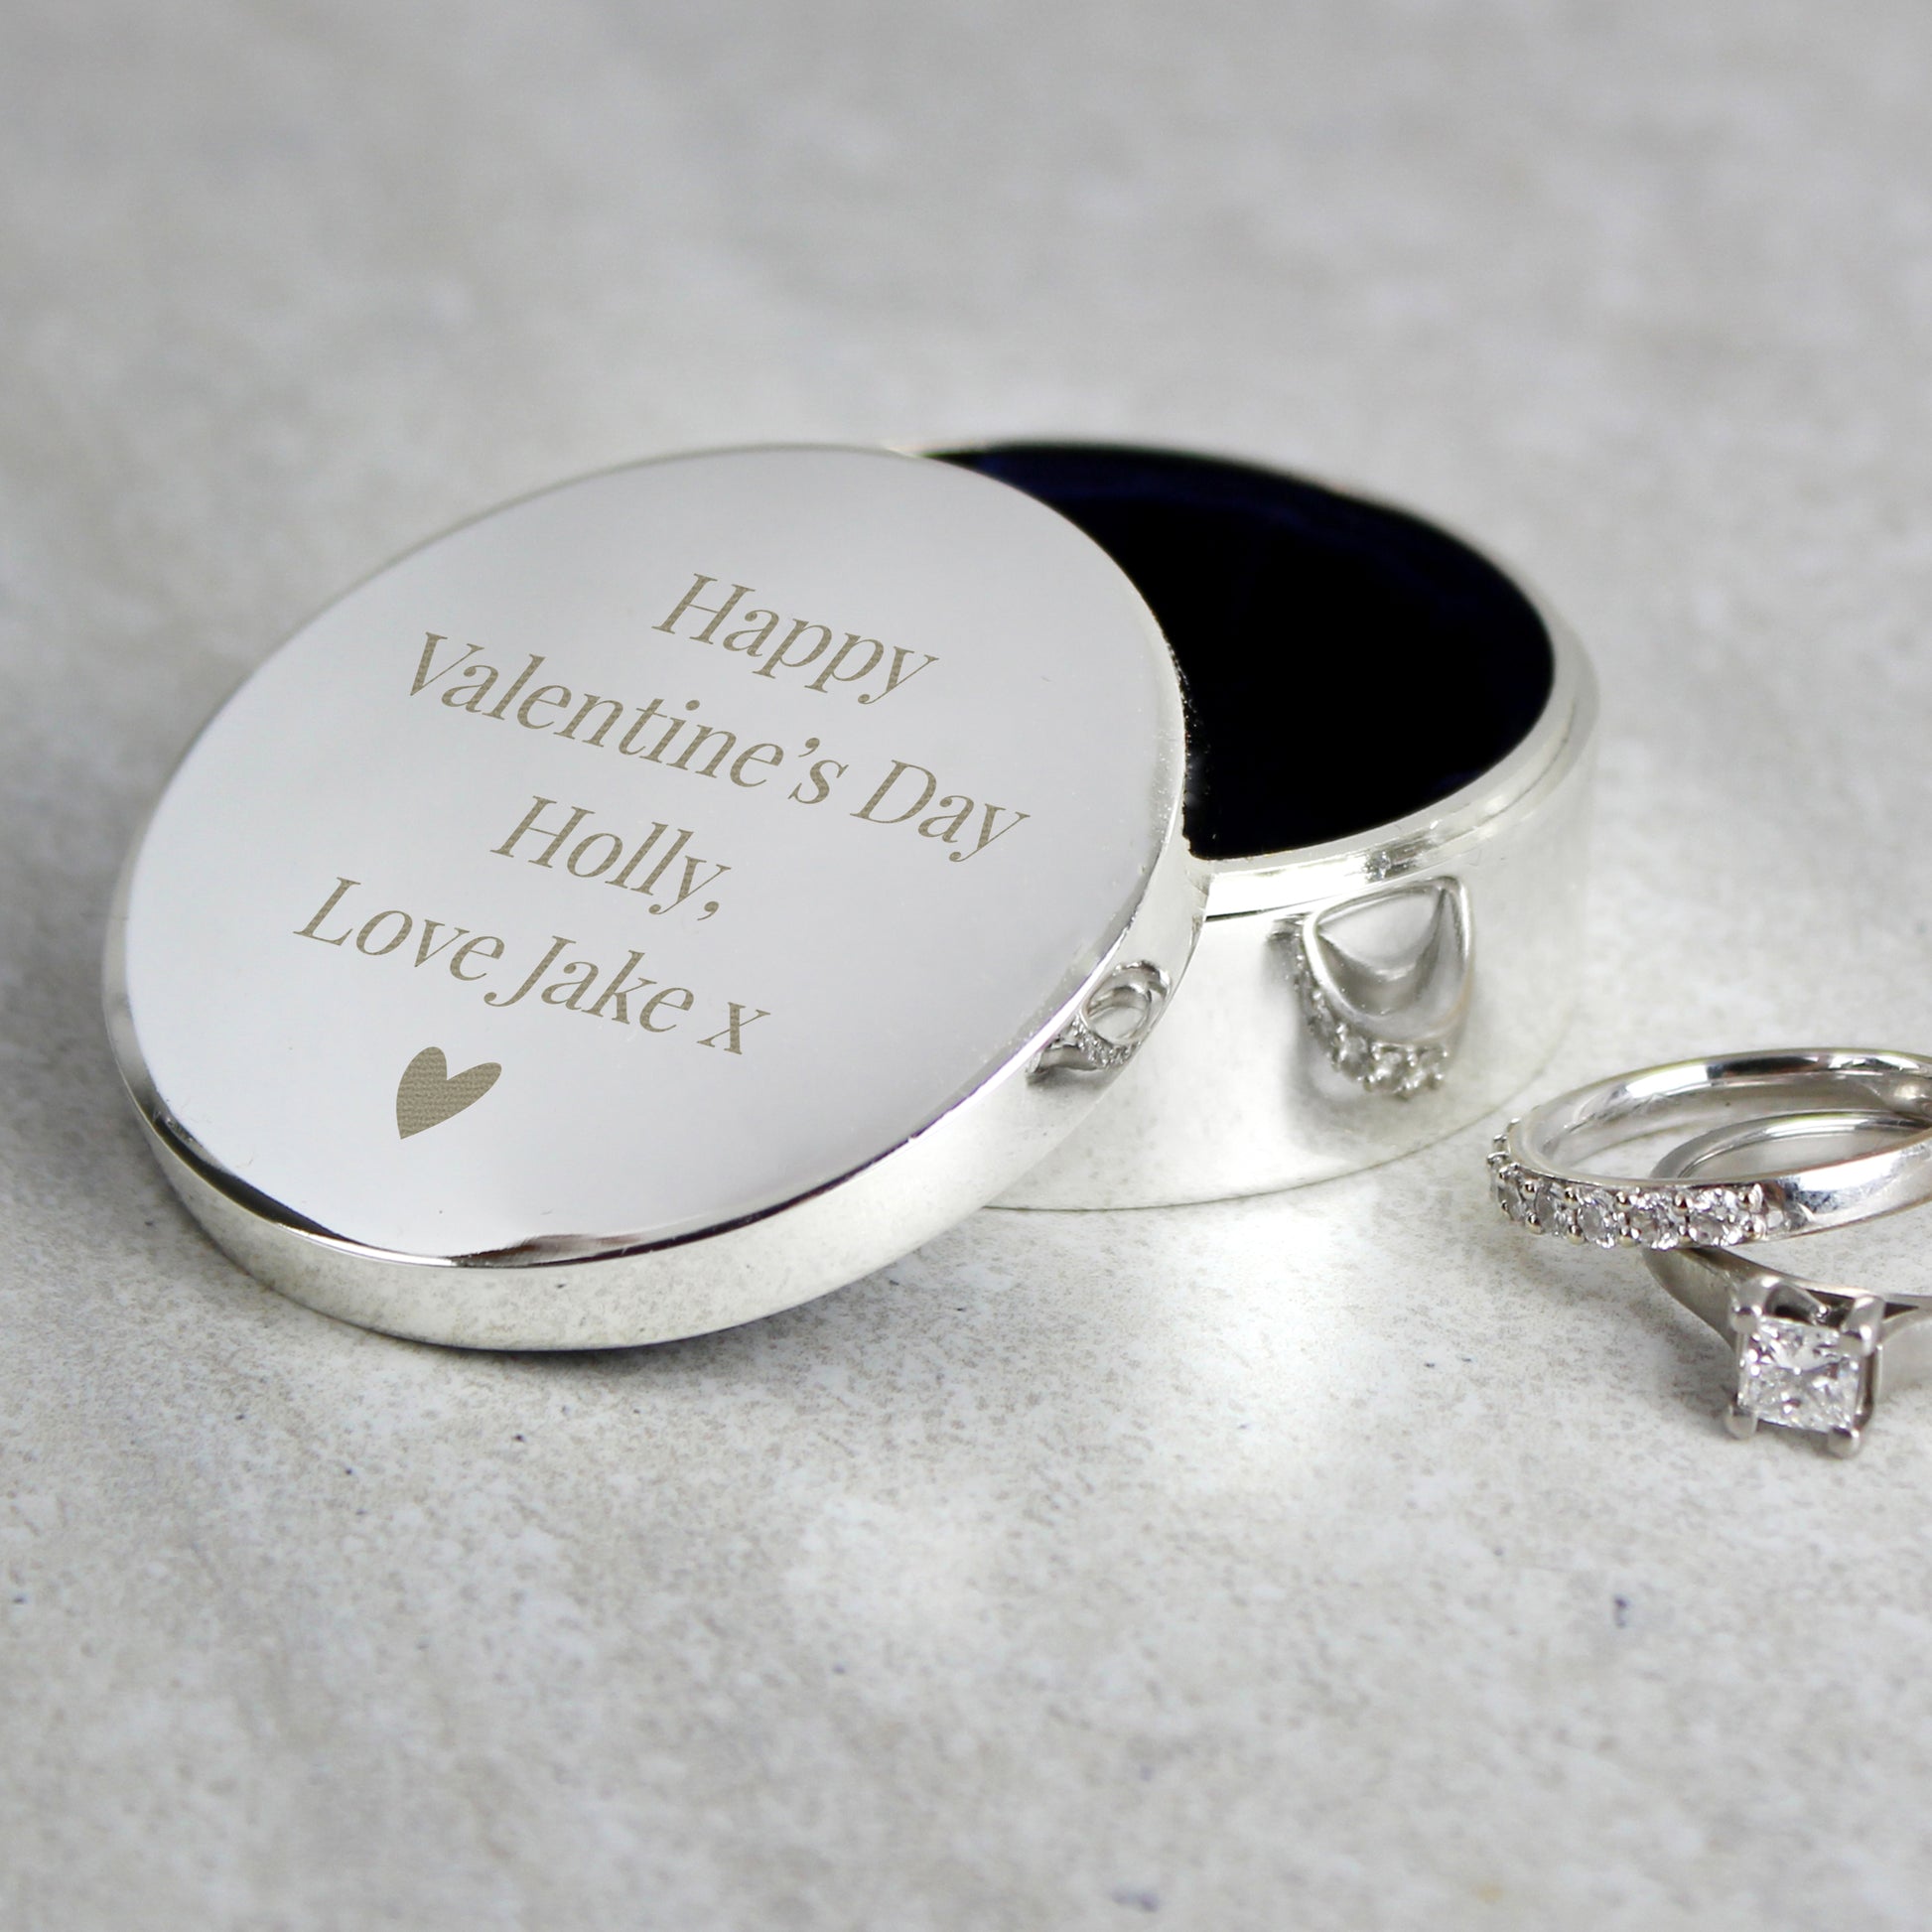 Personalised ring box with love heart and Valentines day message